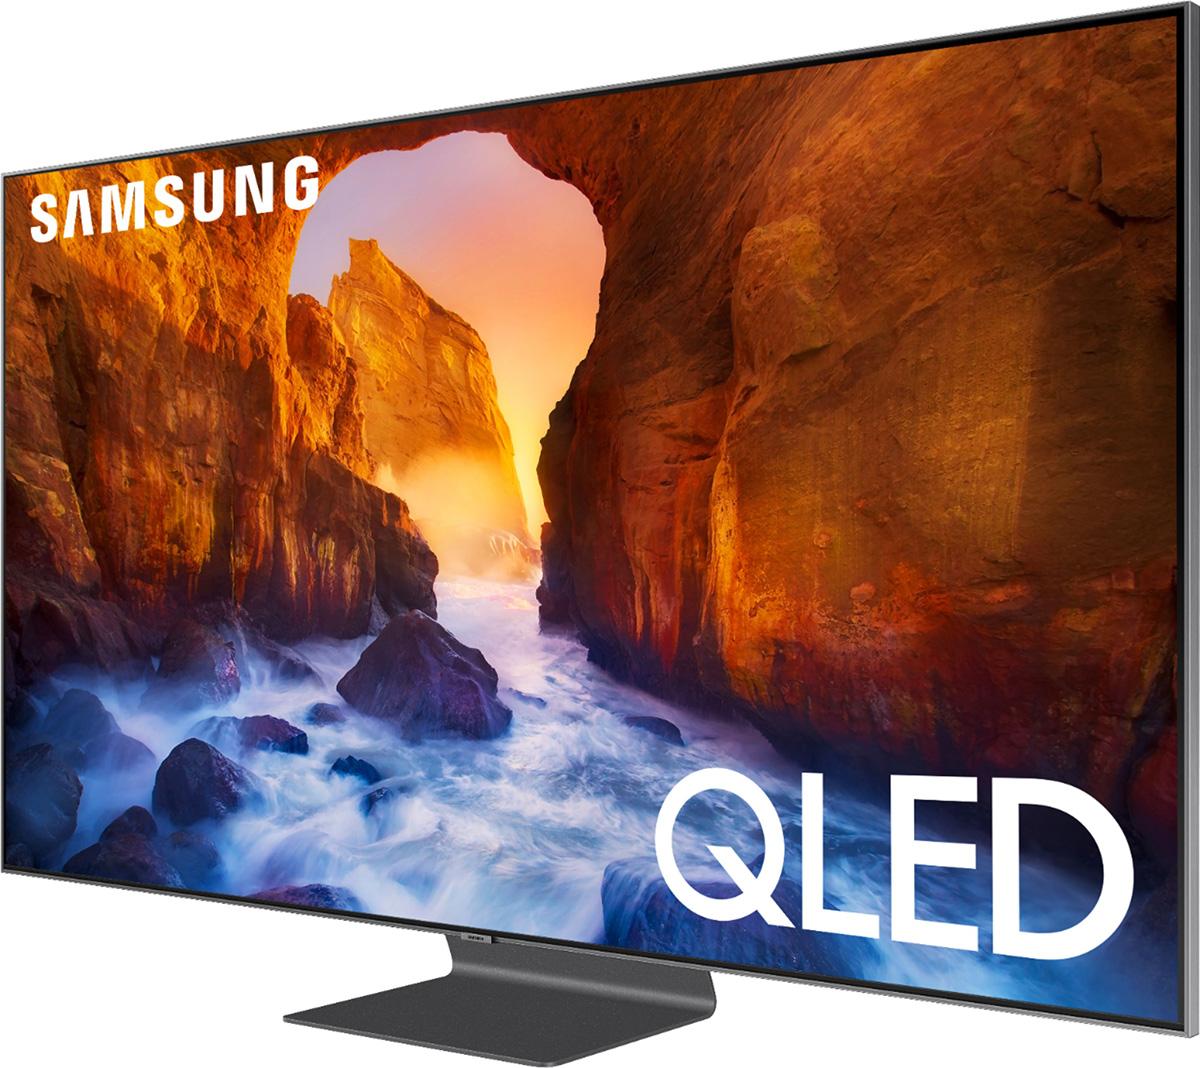 82in Samsung Q90 Series 4K UHD HDR Smart QLED HDTV for $3299.99 Shipped